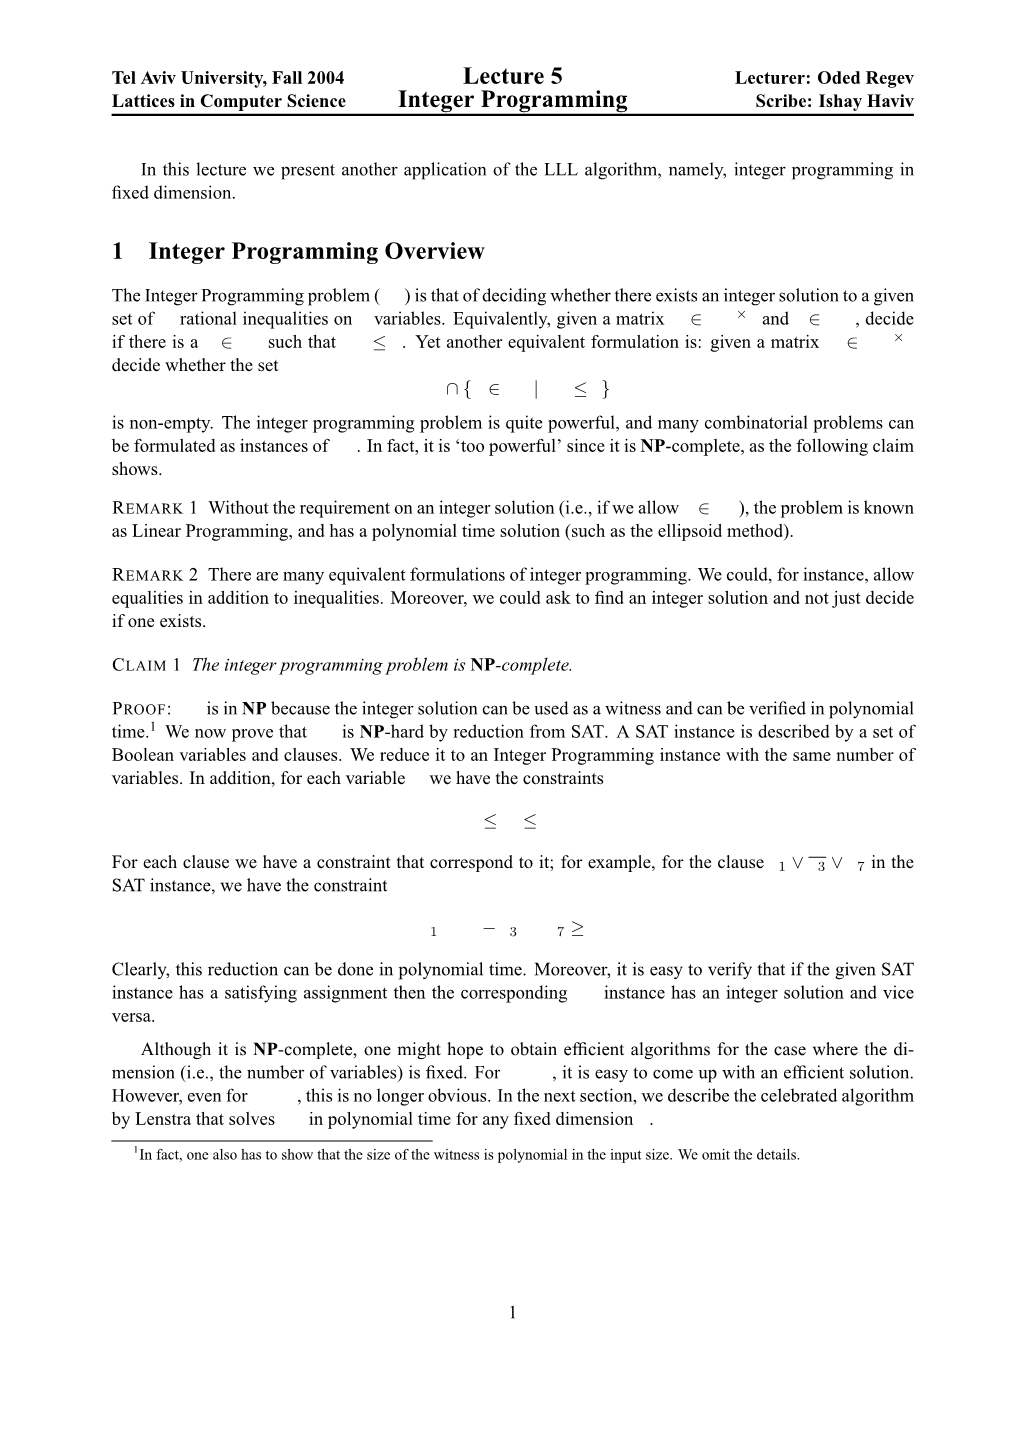 Lecture 5 Integer Programming